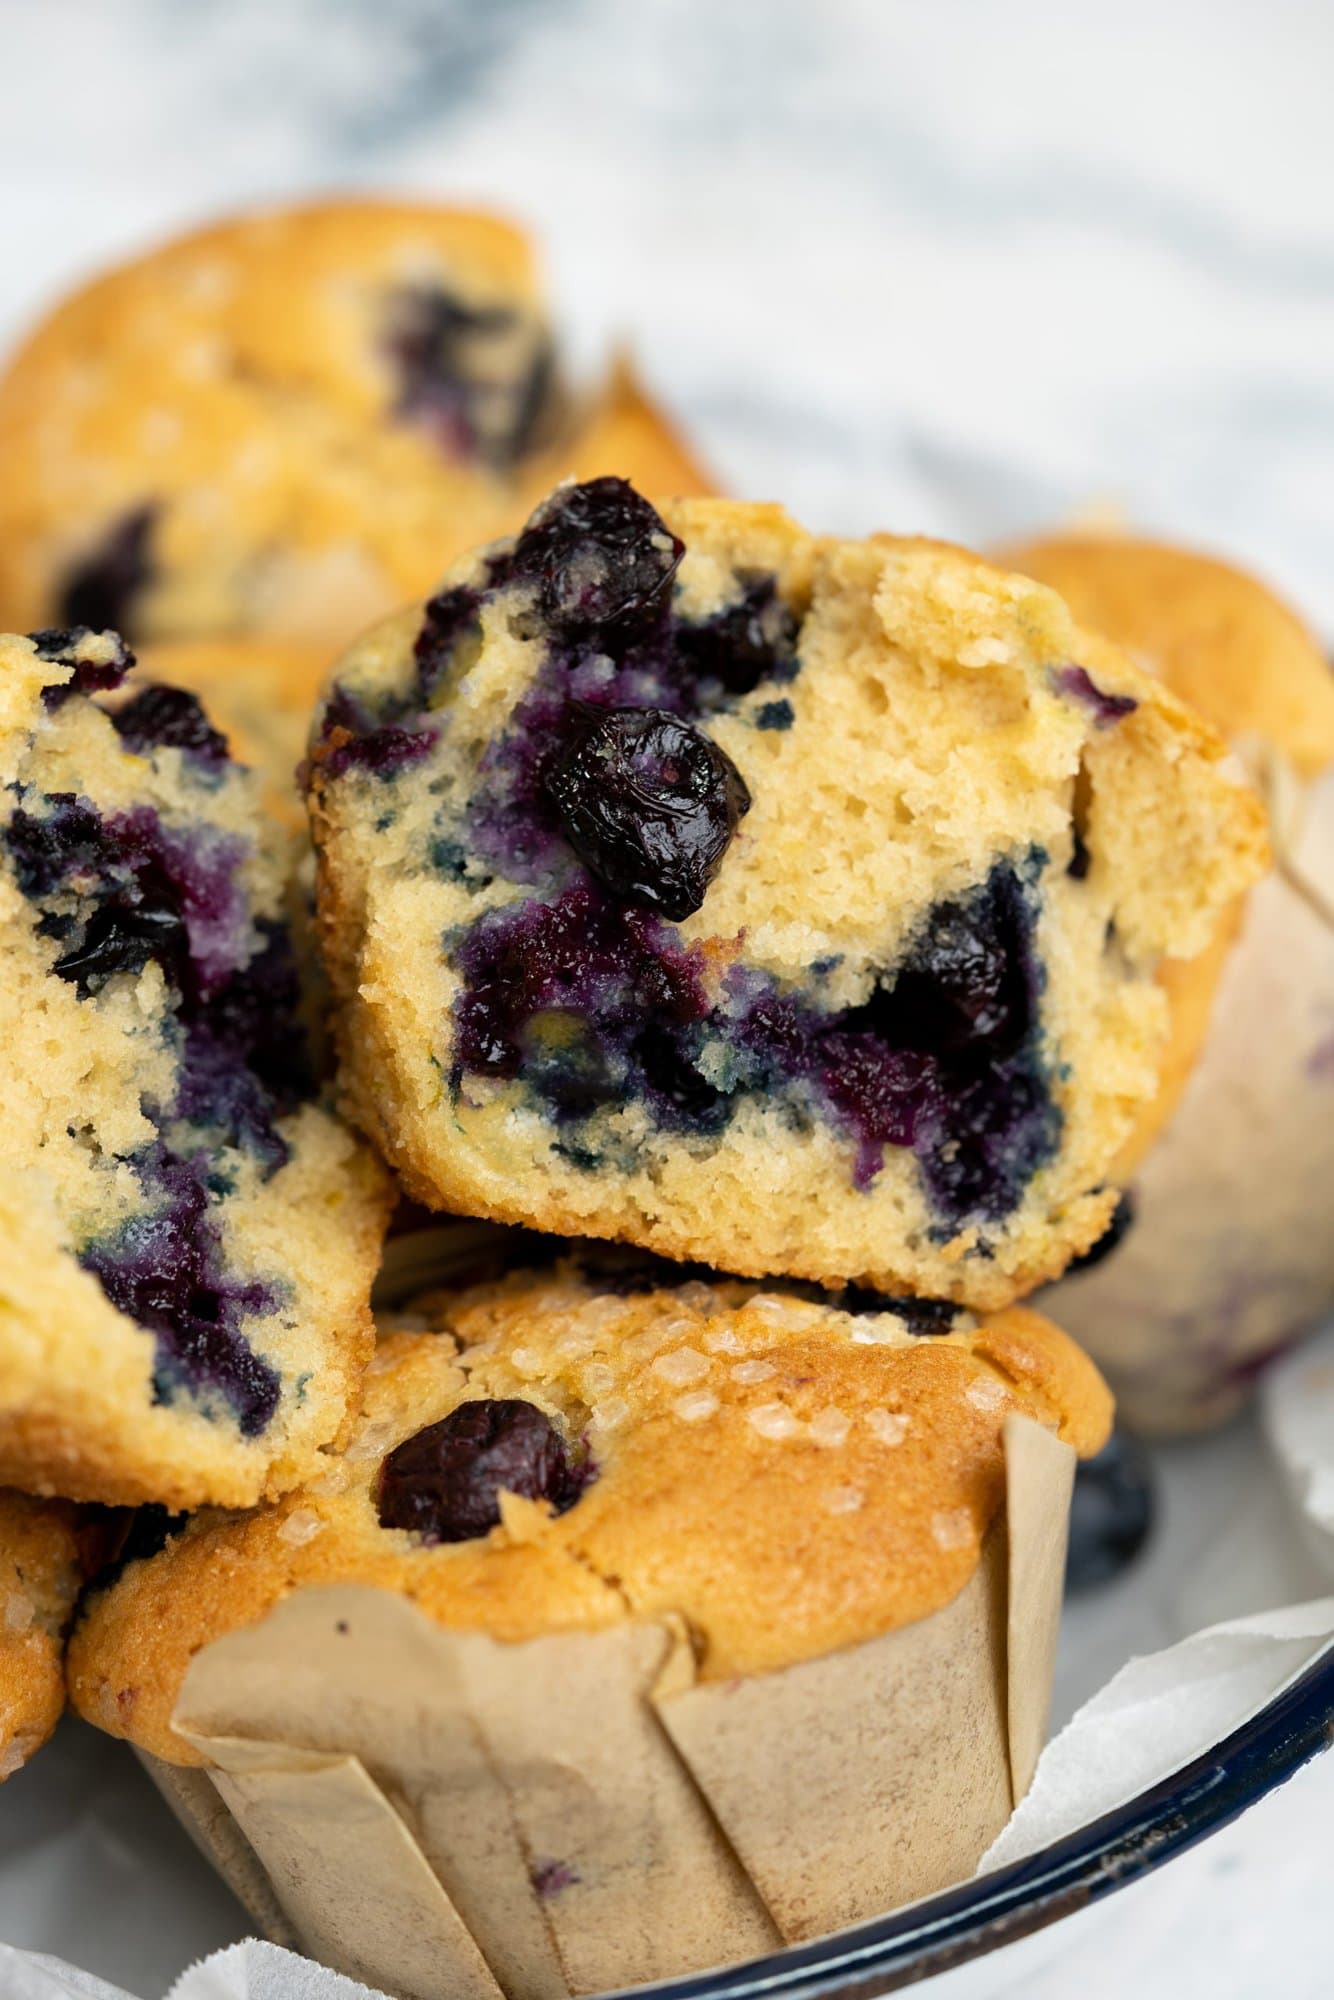 Cross section of a blueberry muffin showing the tender crumb and blueberries. 